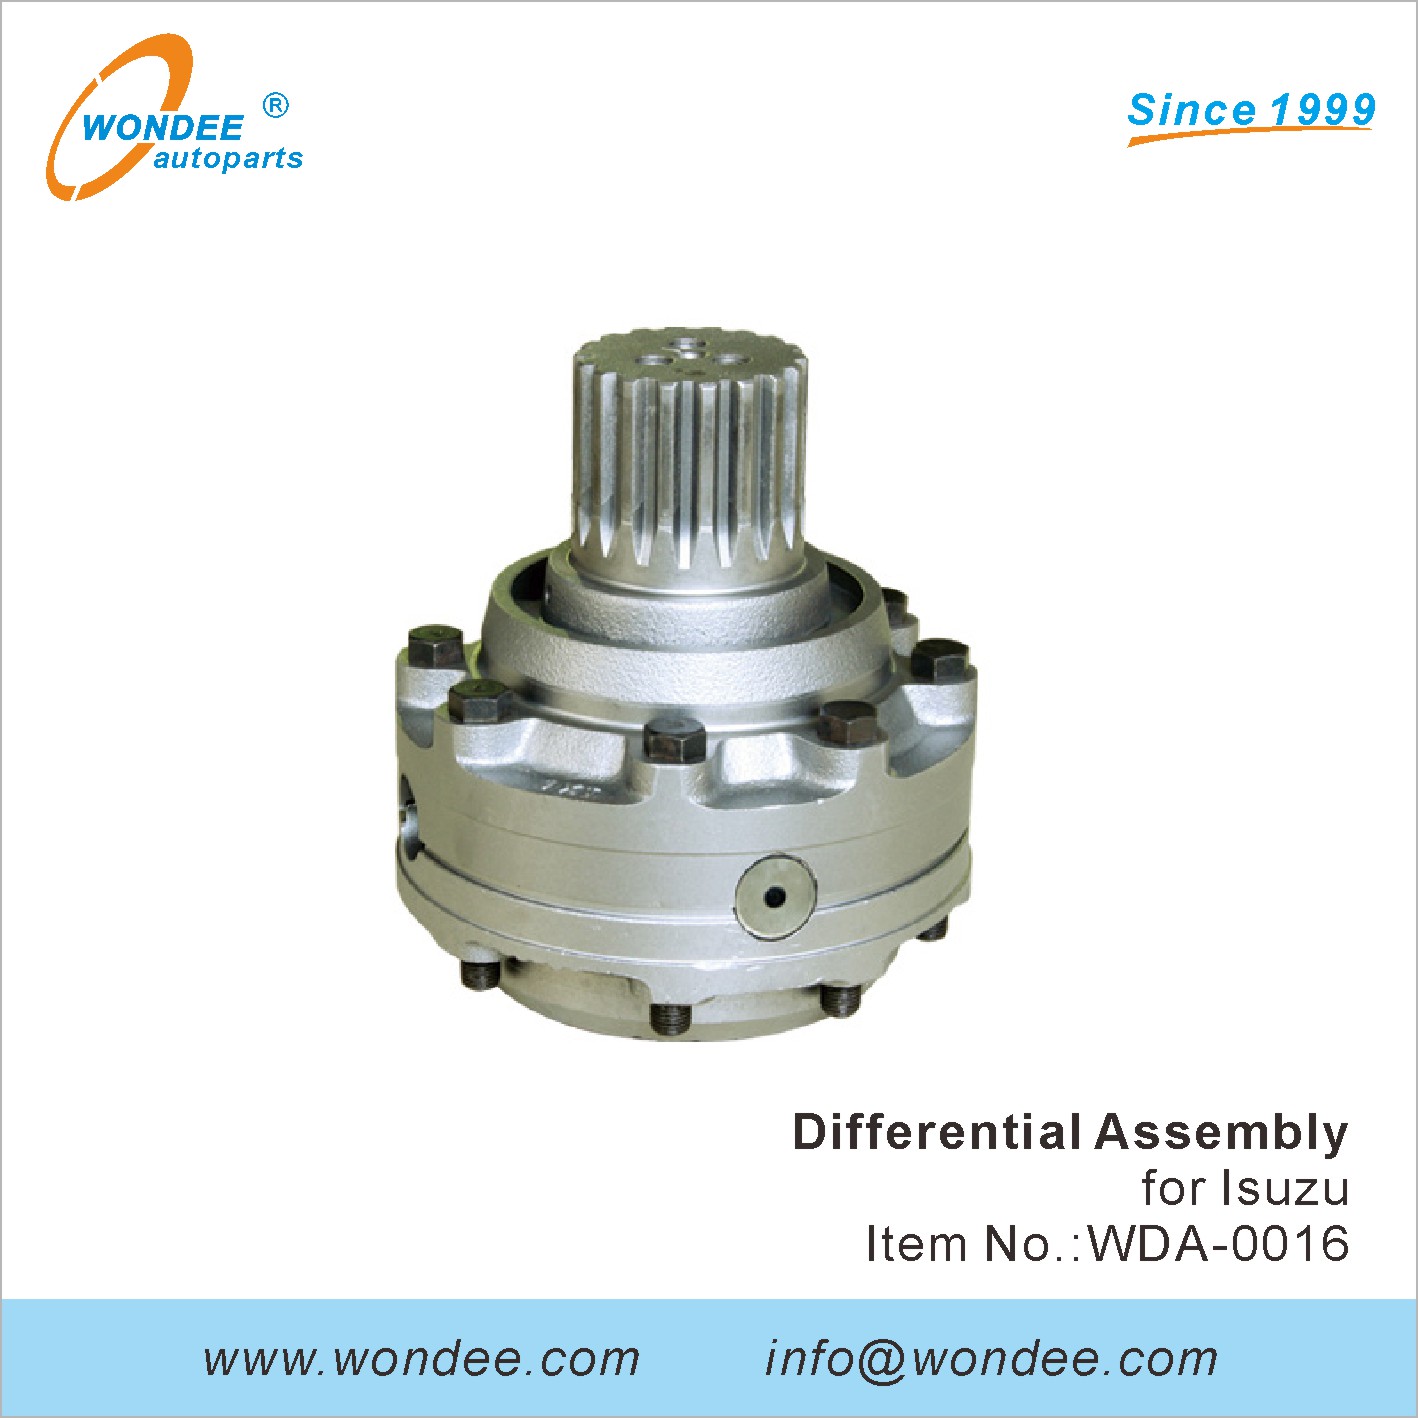 WONDEE differential assembly (16)